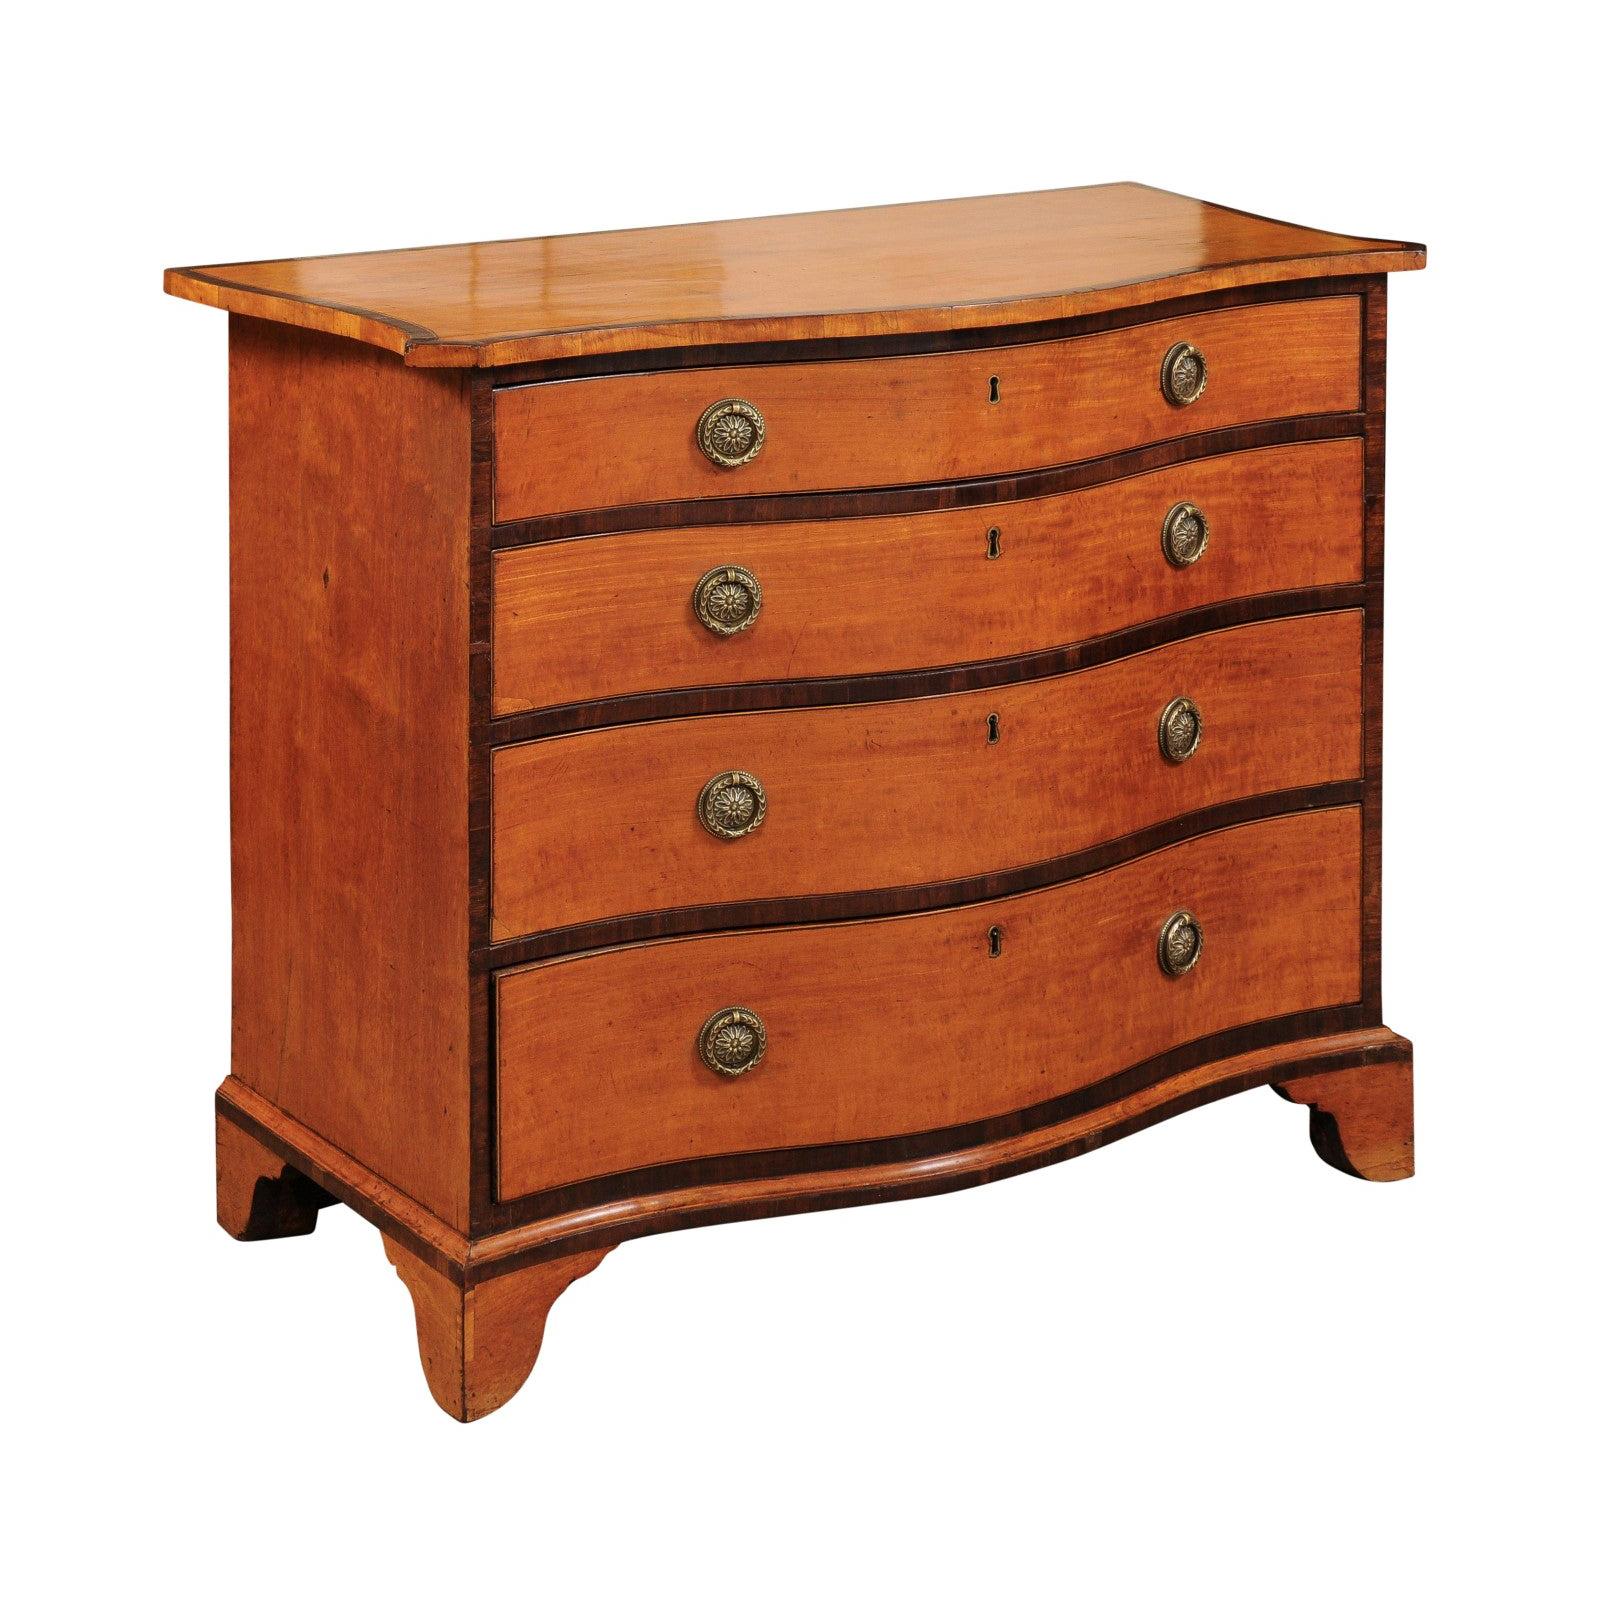 Early 19th Century English George III Satinwood Chest with 4 Drawers